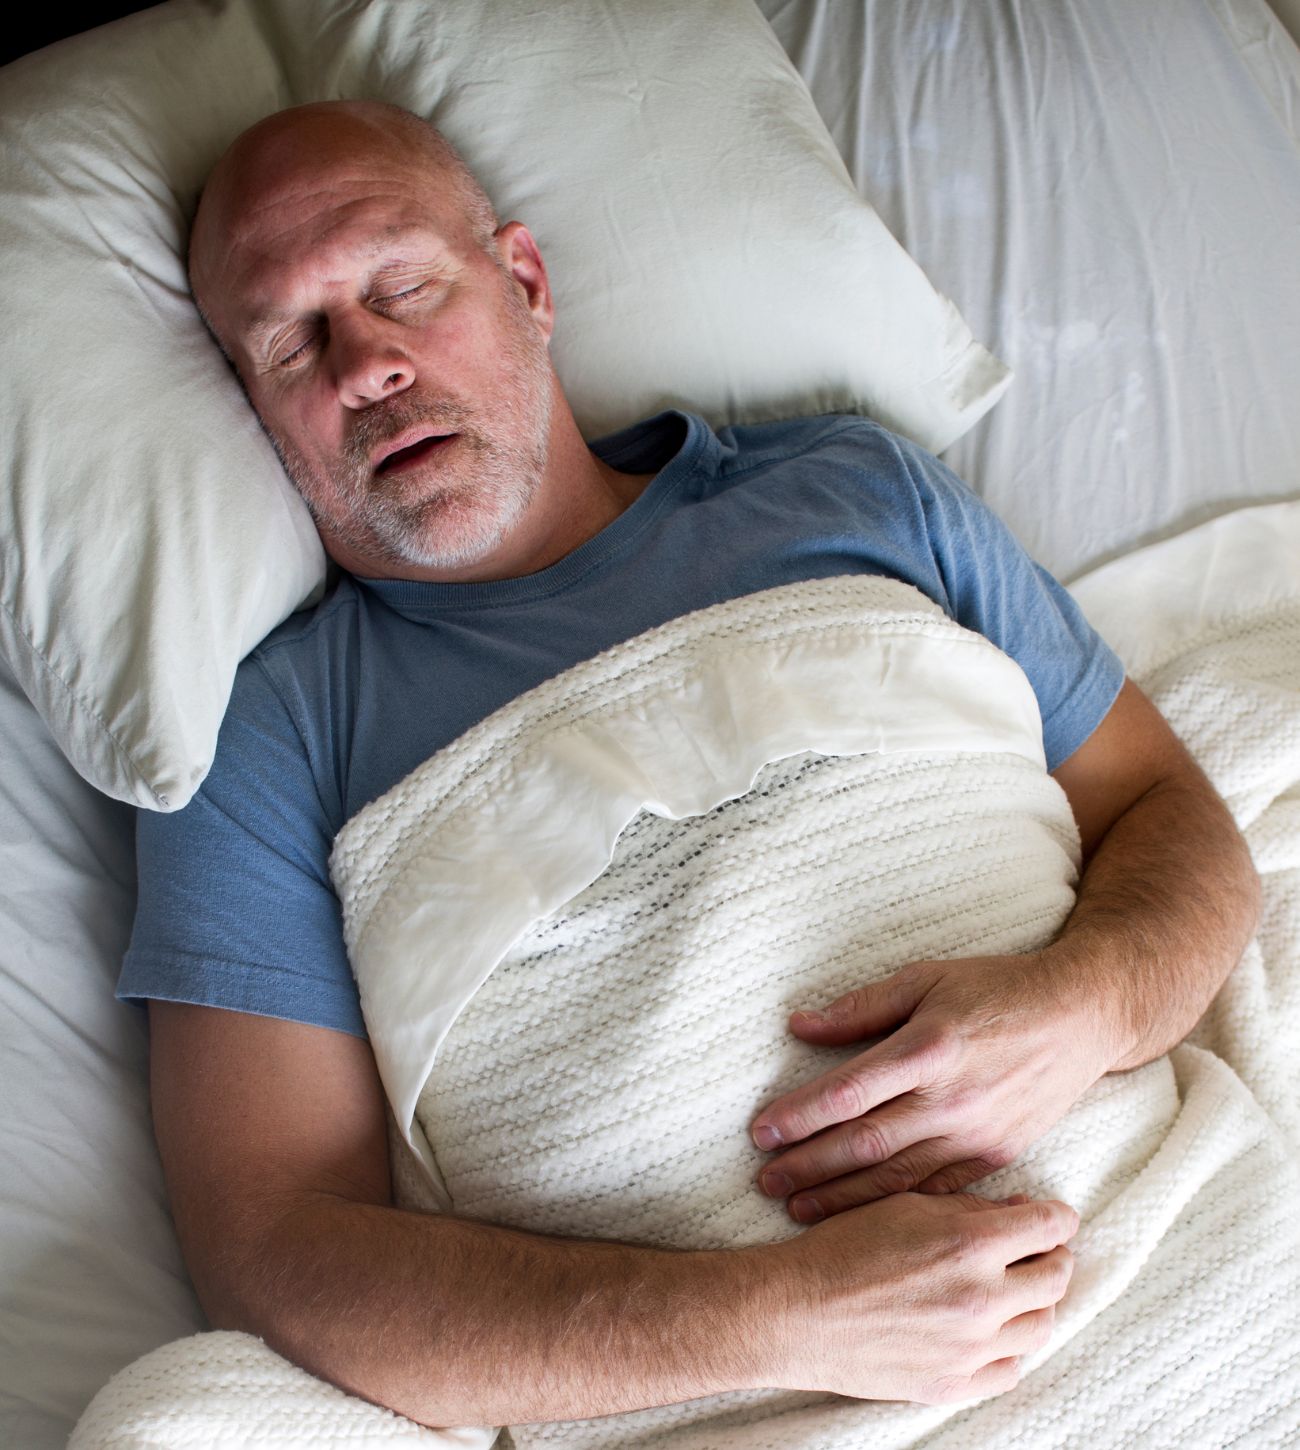 Photo of a man sleeping in bed with his mouth open.